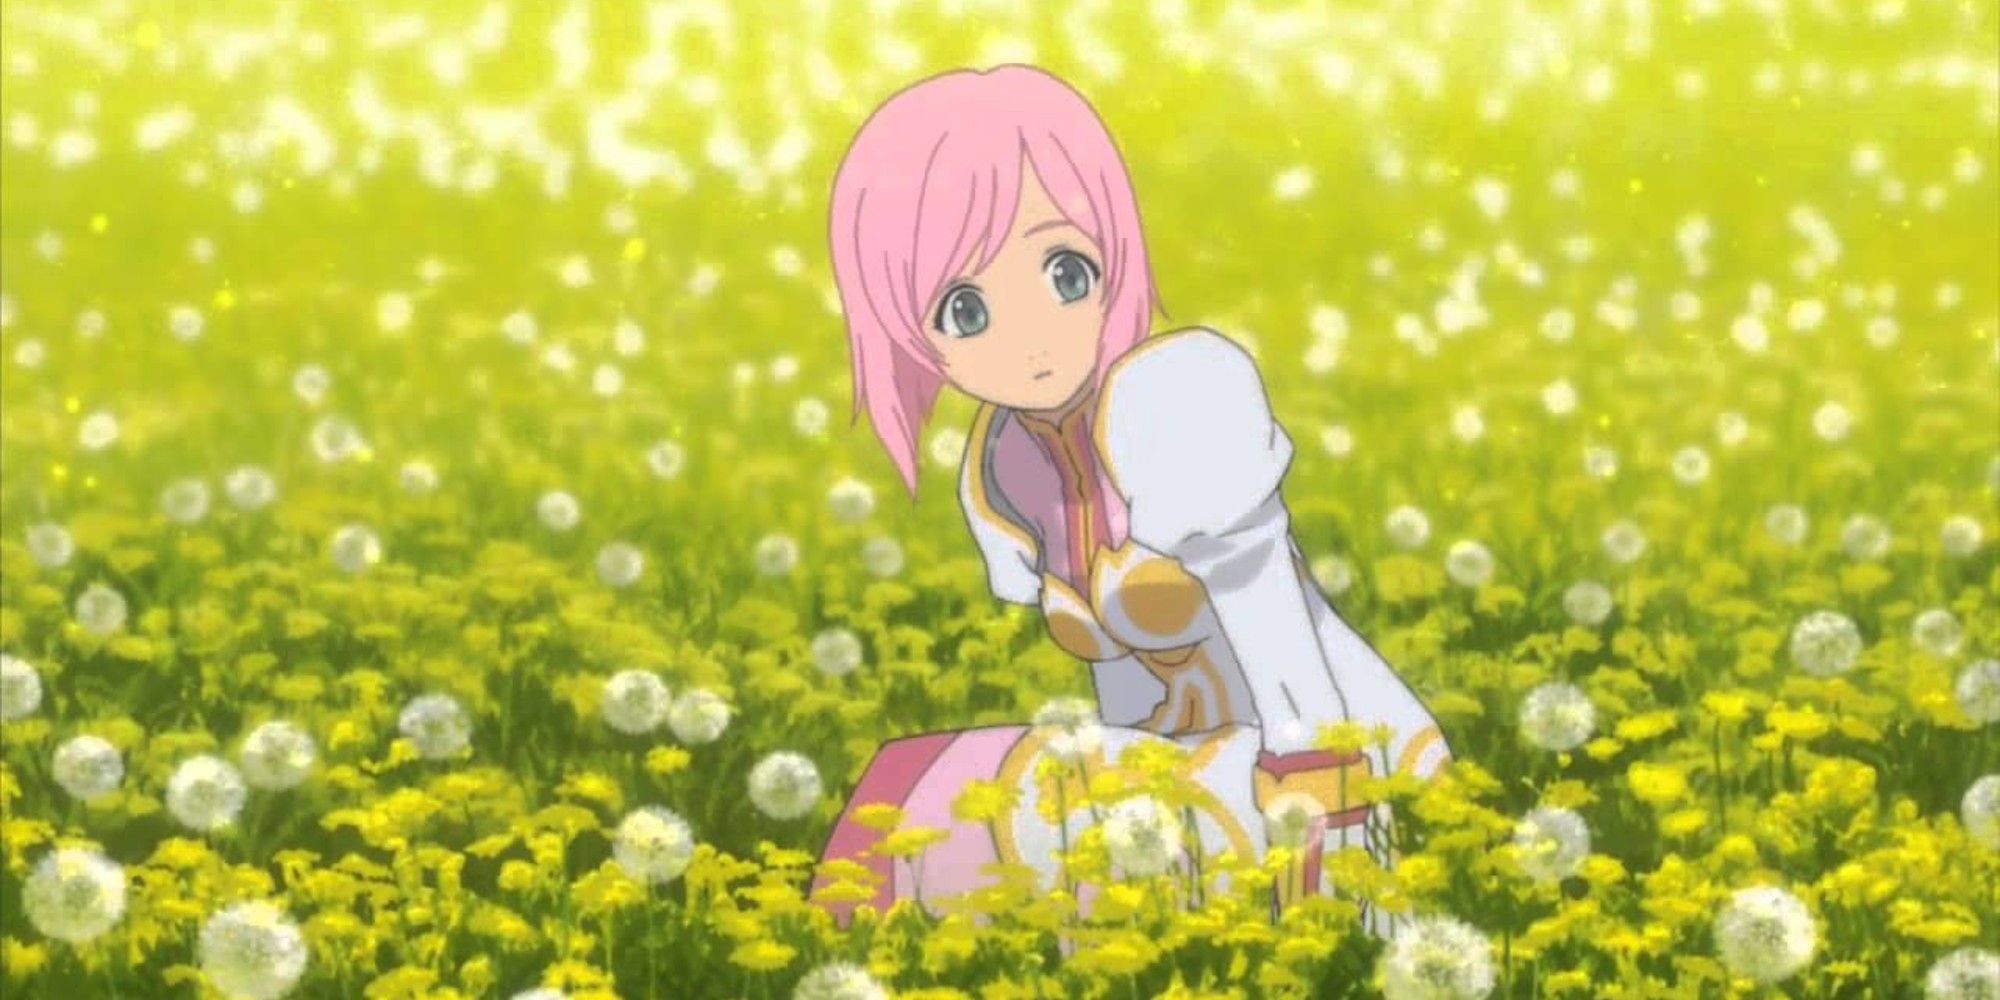 Estelle gets startles while sitting in flowers